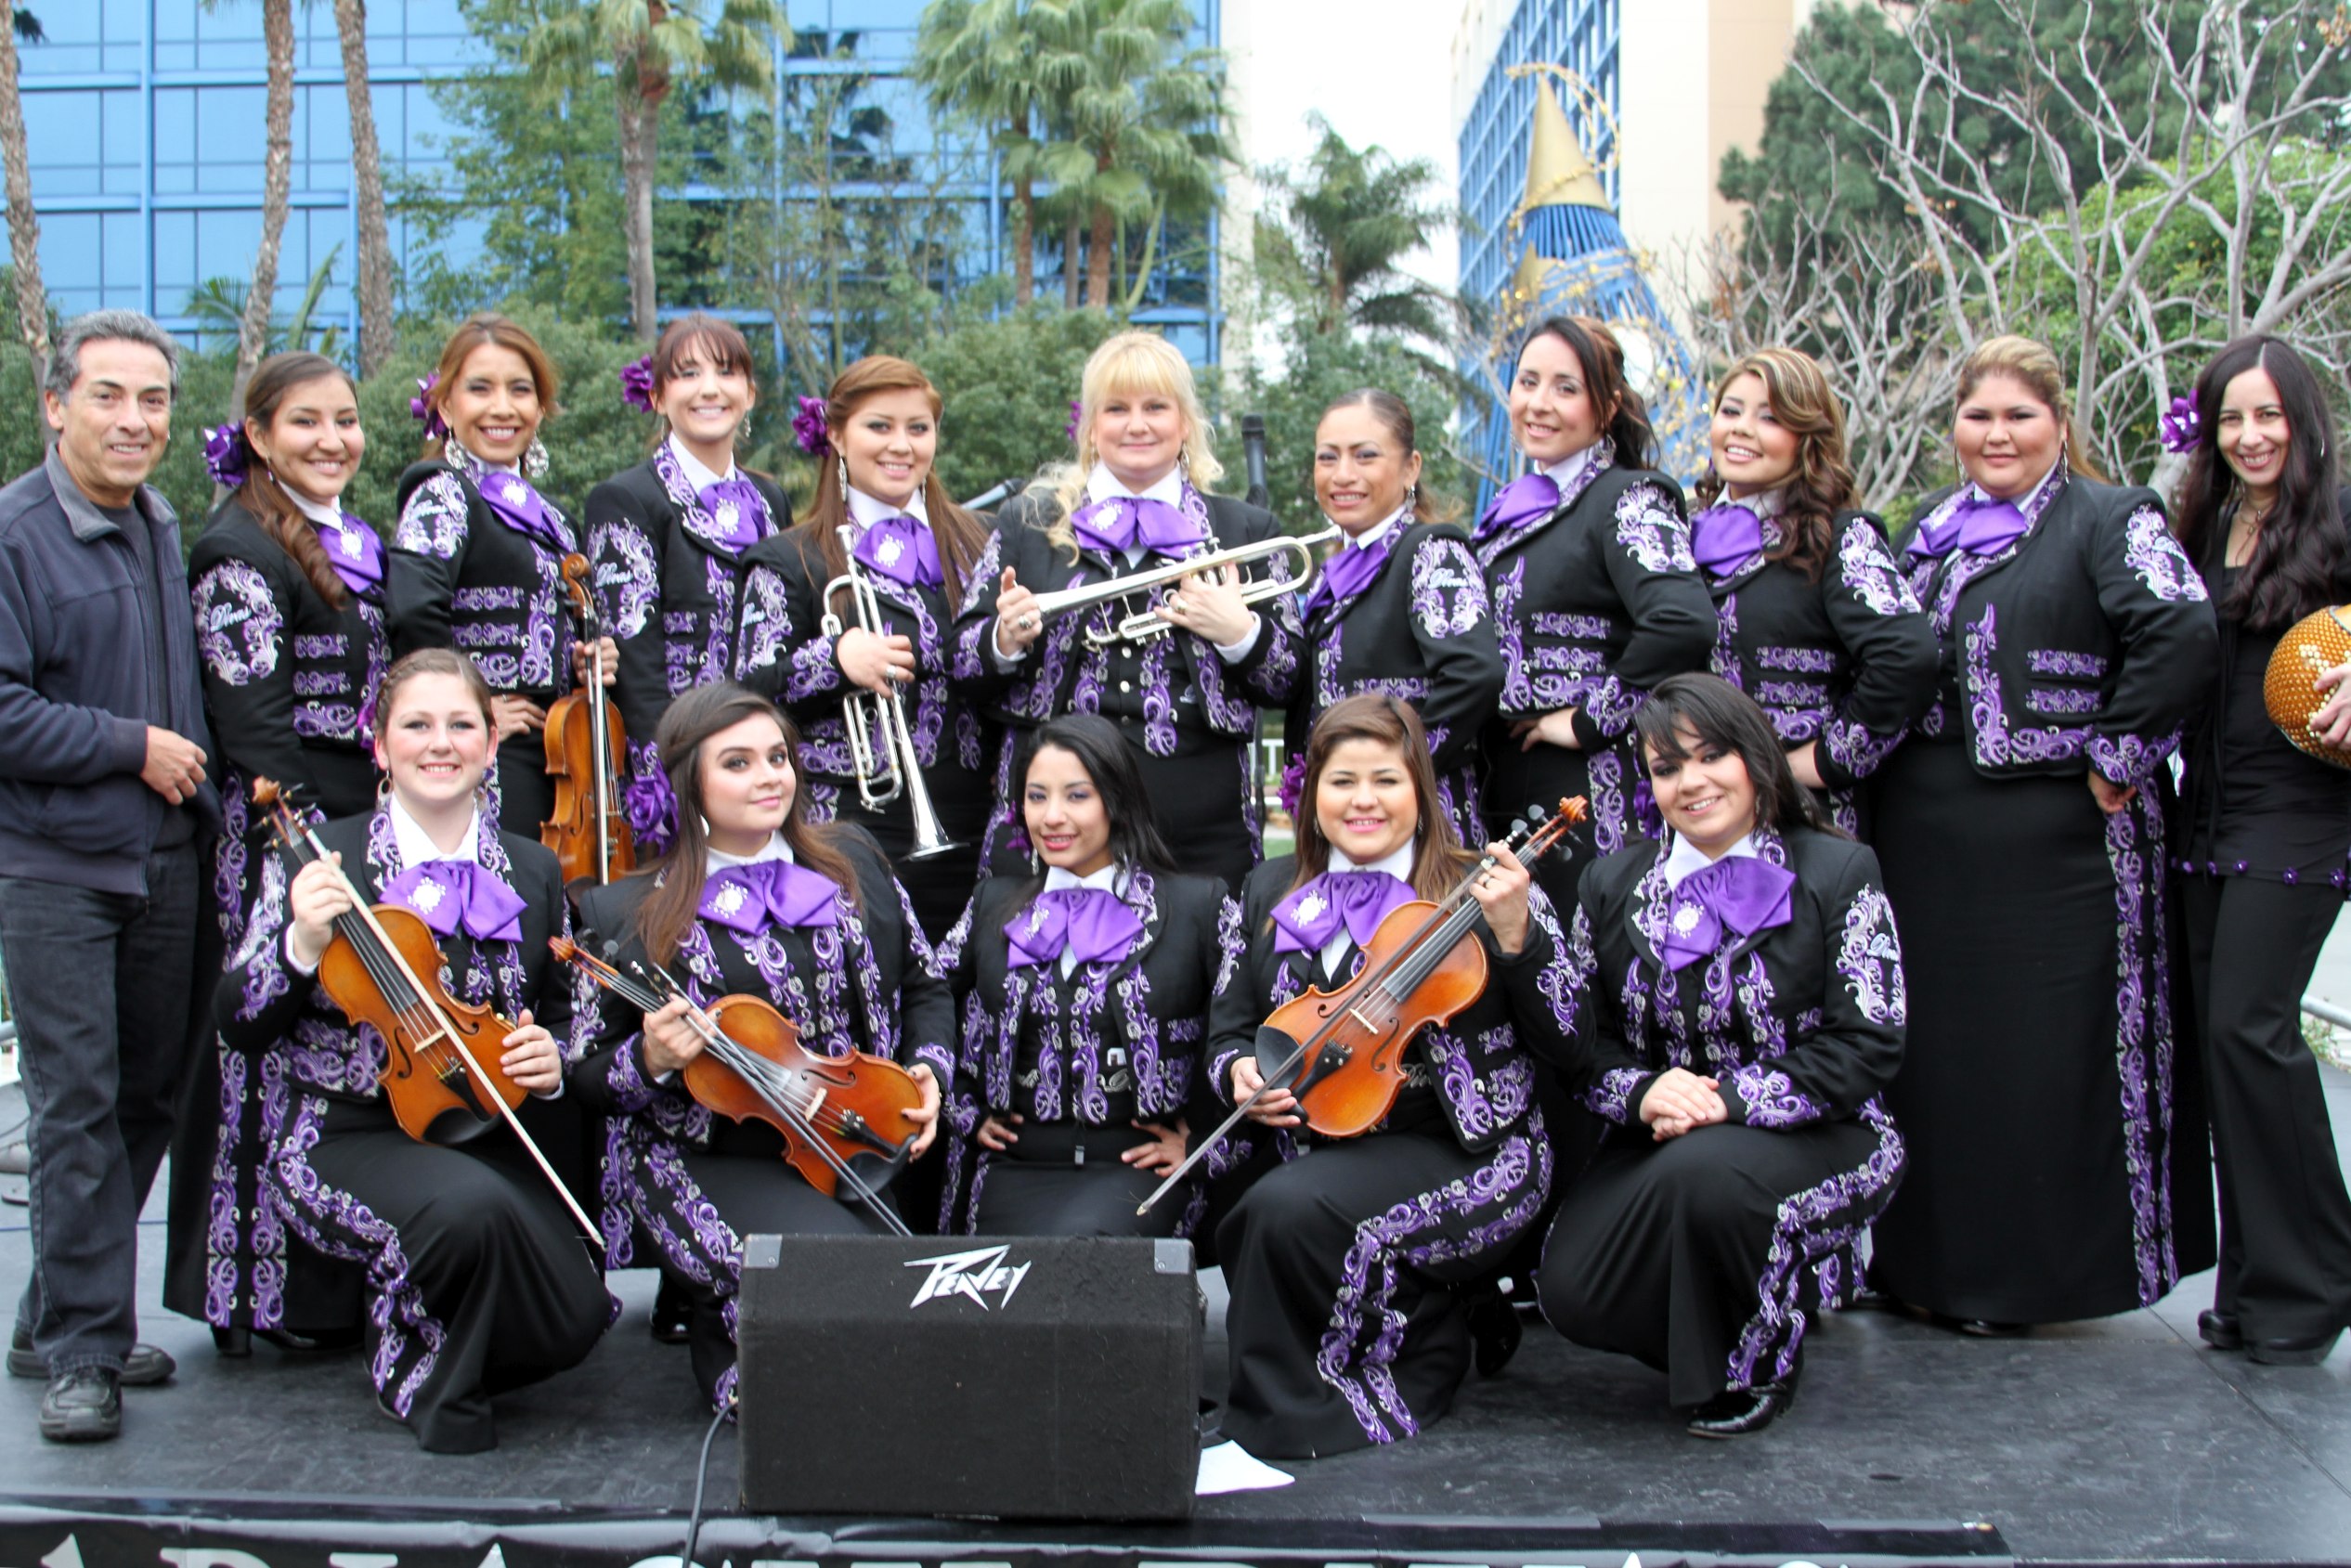 An all woman mariachi band, dressed in traditional attire with purple accents, holding their instruments and smiling